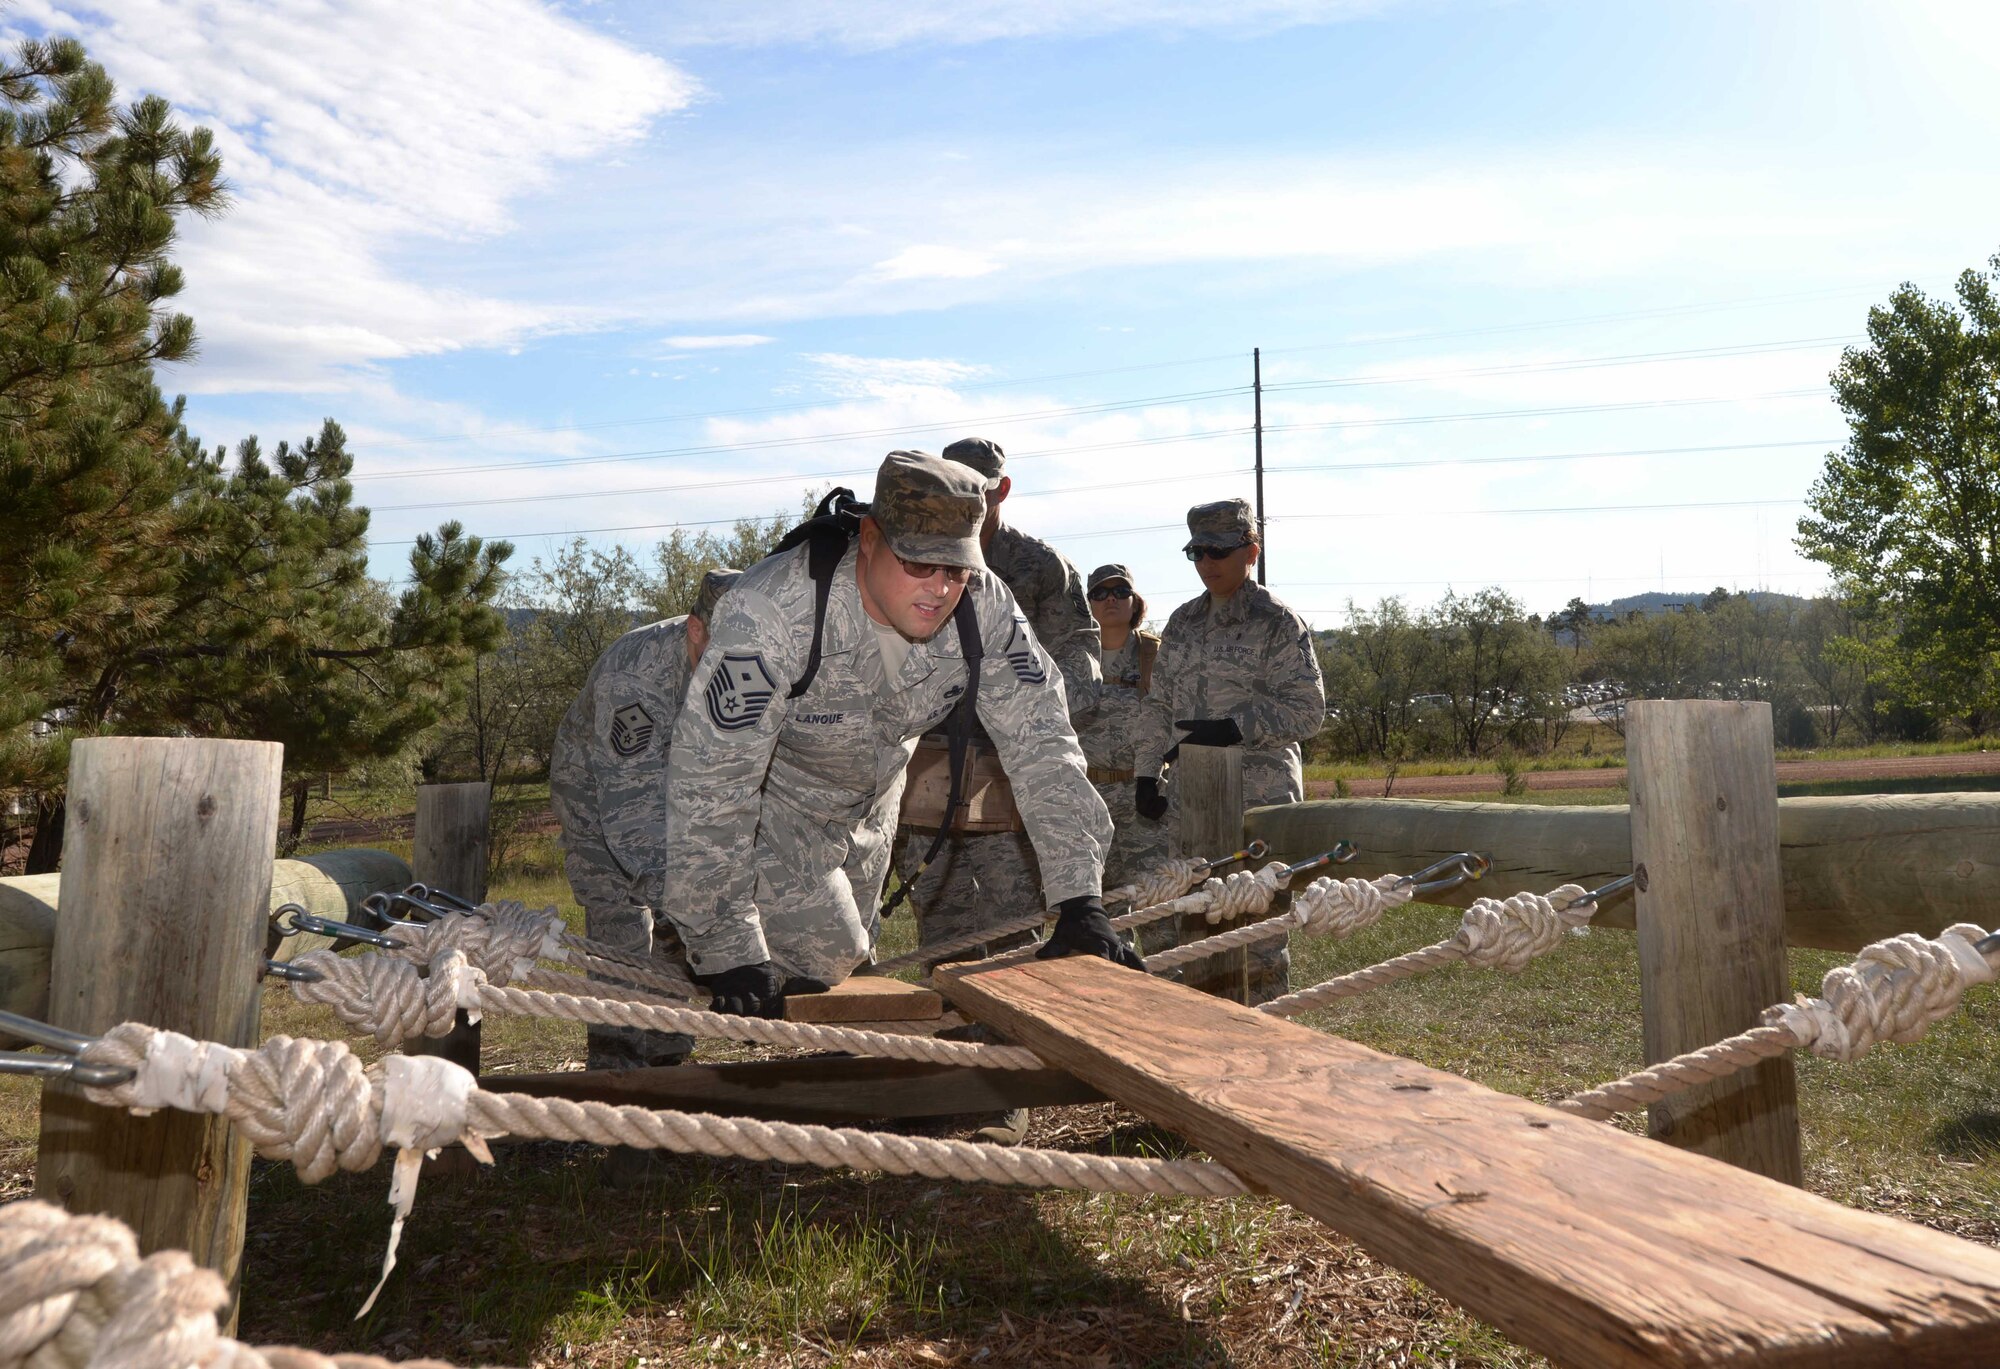 Master Sgt. Paul Lanoue, the first sergeant assigned to the 28th Force Support Squadron, attempts to cross an obstacle during a Leadership Reaction Course at the South Dakota National Guard West Camp Rapid training facility, Rapid City, S.D., Sept. 15, 2016. The exercise, consisting of more than 10 obstacles, required critical and strategic thinking as well as teamwork to surpass each obstacle. (U.S. Air Force photo by Airman 1st Class Donald C. Knechtel)